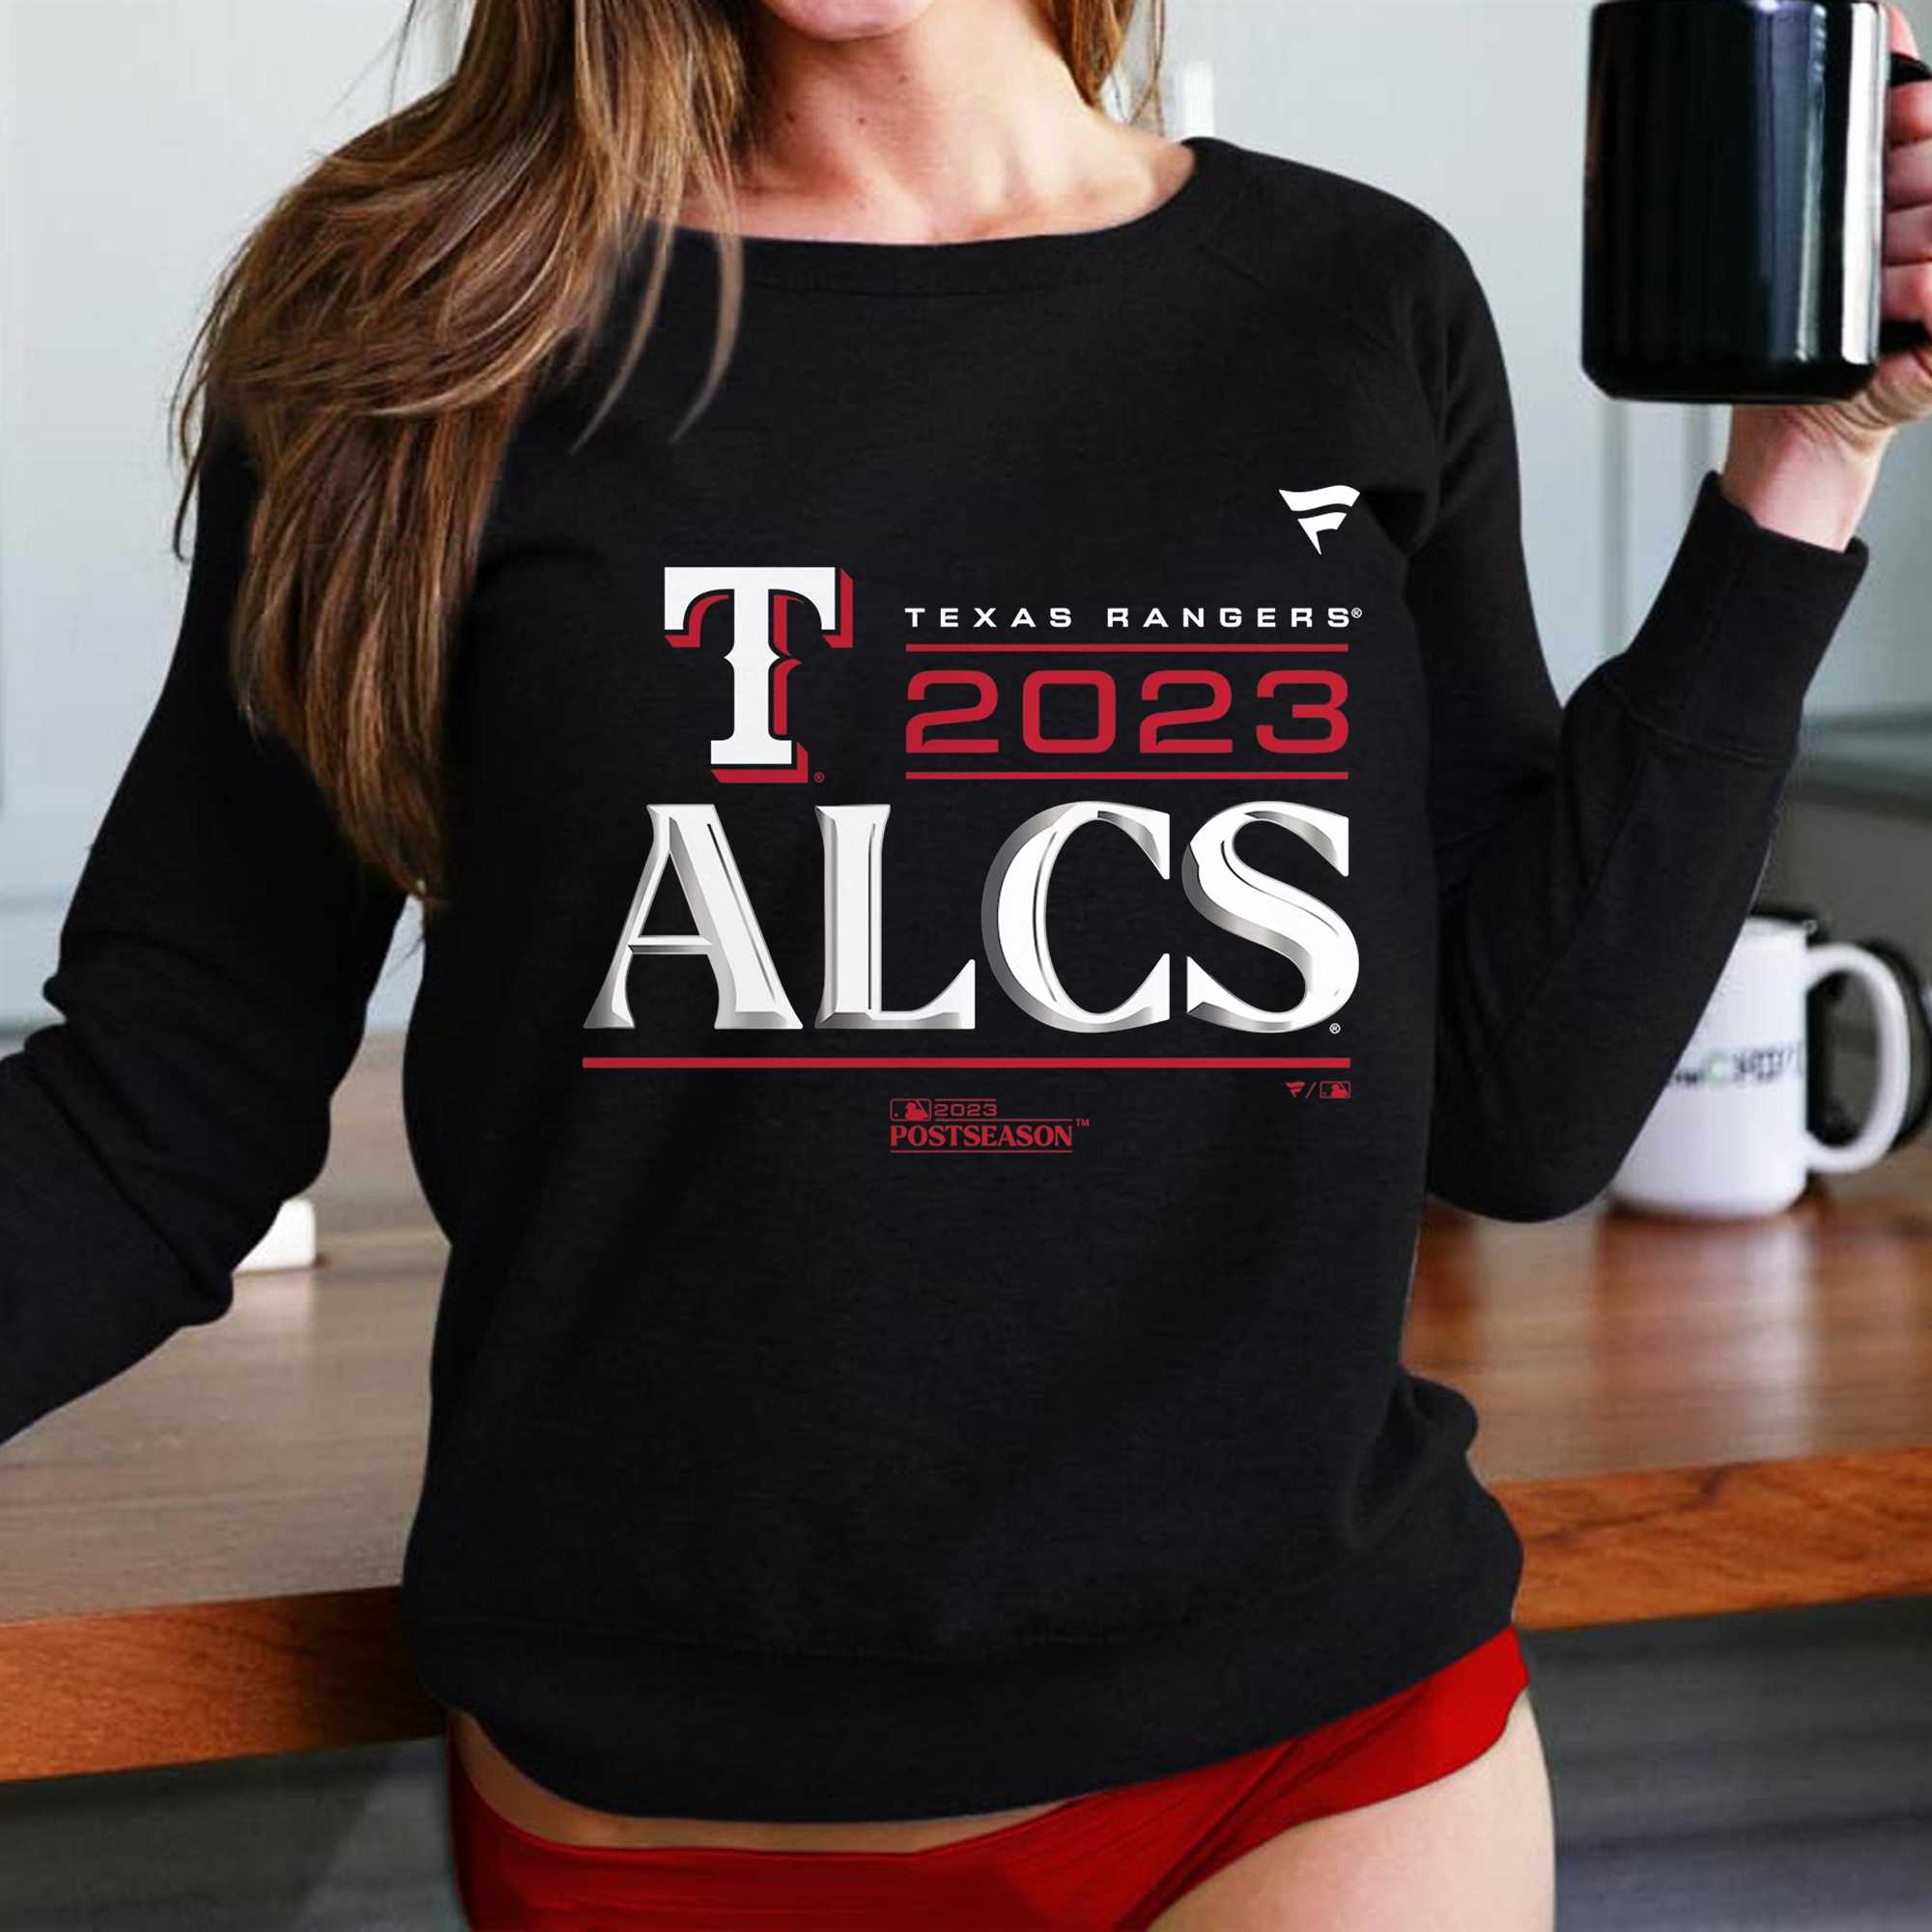 Go And Take It 2023 ALCS Texas Rangers Wins 3 Games Shirt, hoodie, sweater  and long sleeve